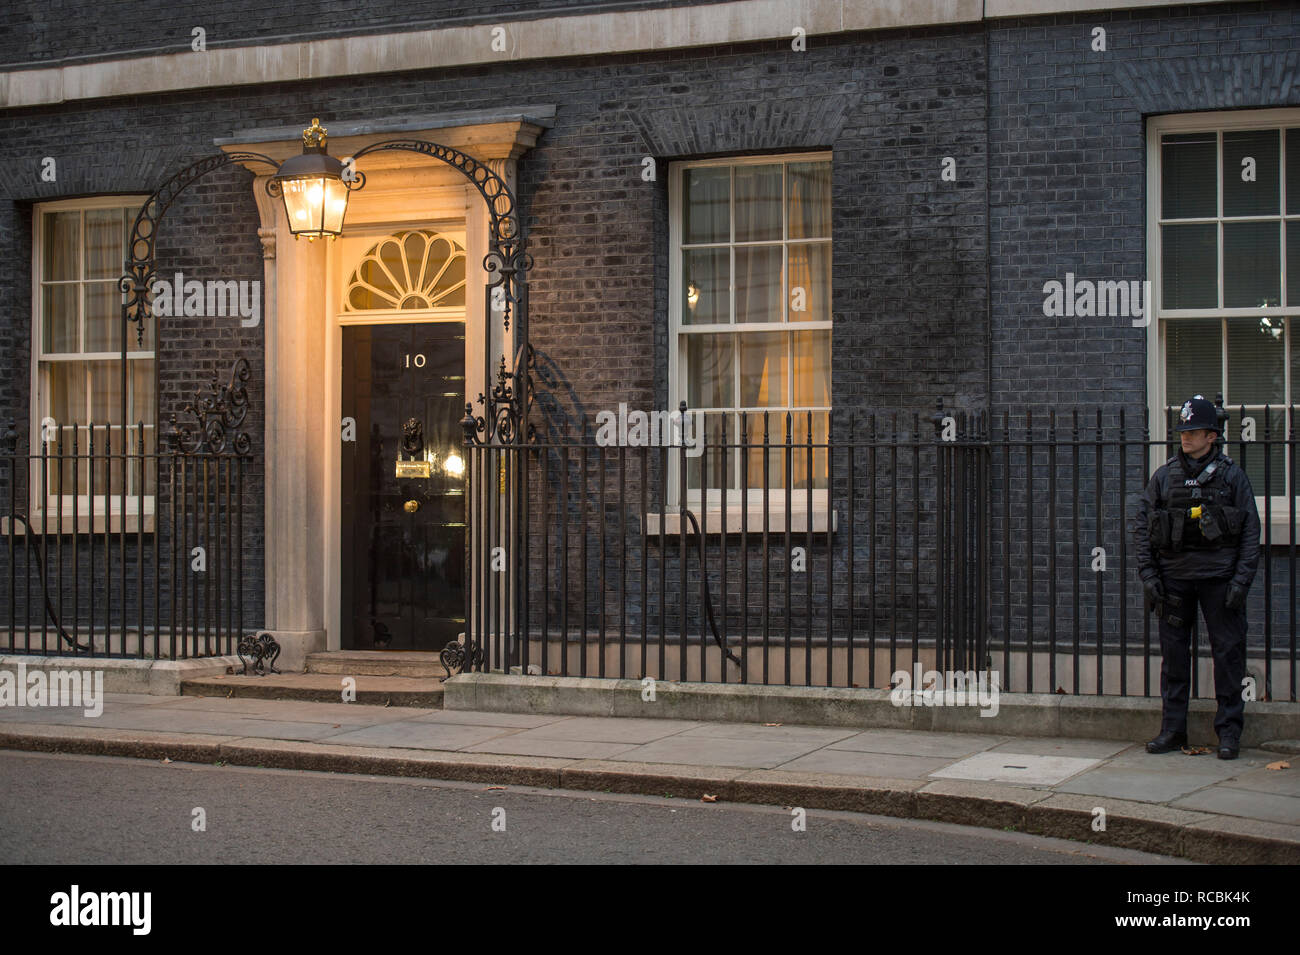 Downing Street, London, UK. 15 January 2019. Early morning in Downing Street before weekly cabinet meeting. Credit: Malcolm Park/Alamy Live News. Stock Photo